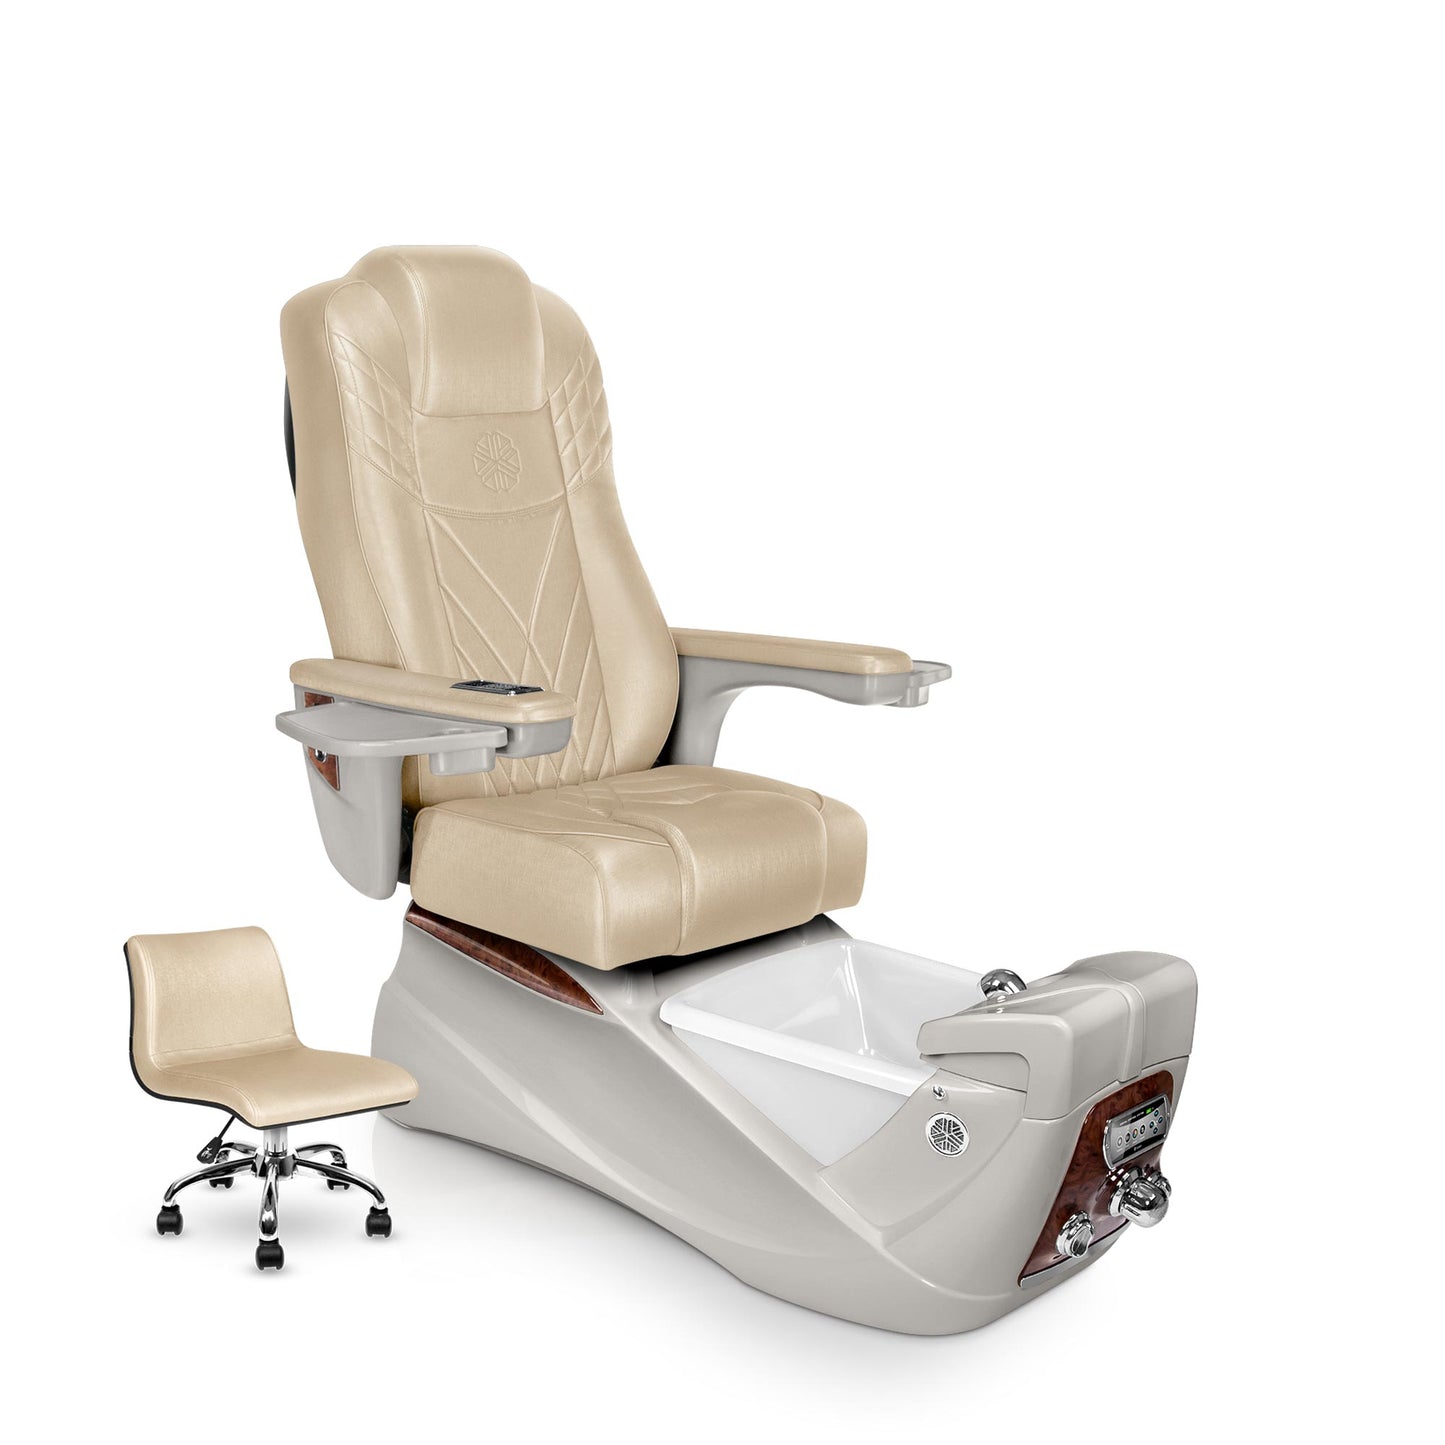 Lexor INFINITY pedicure chair with glazed gold cushion and sandstone spa base